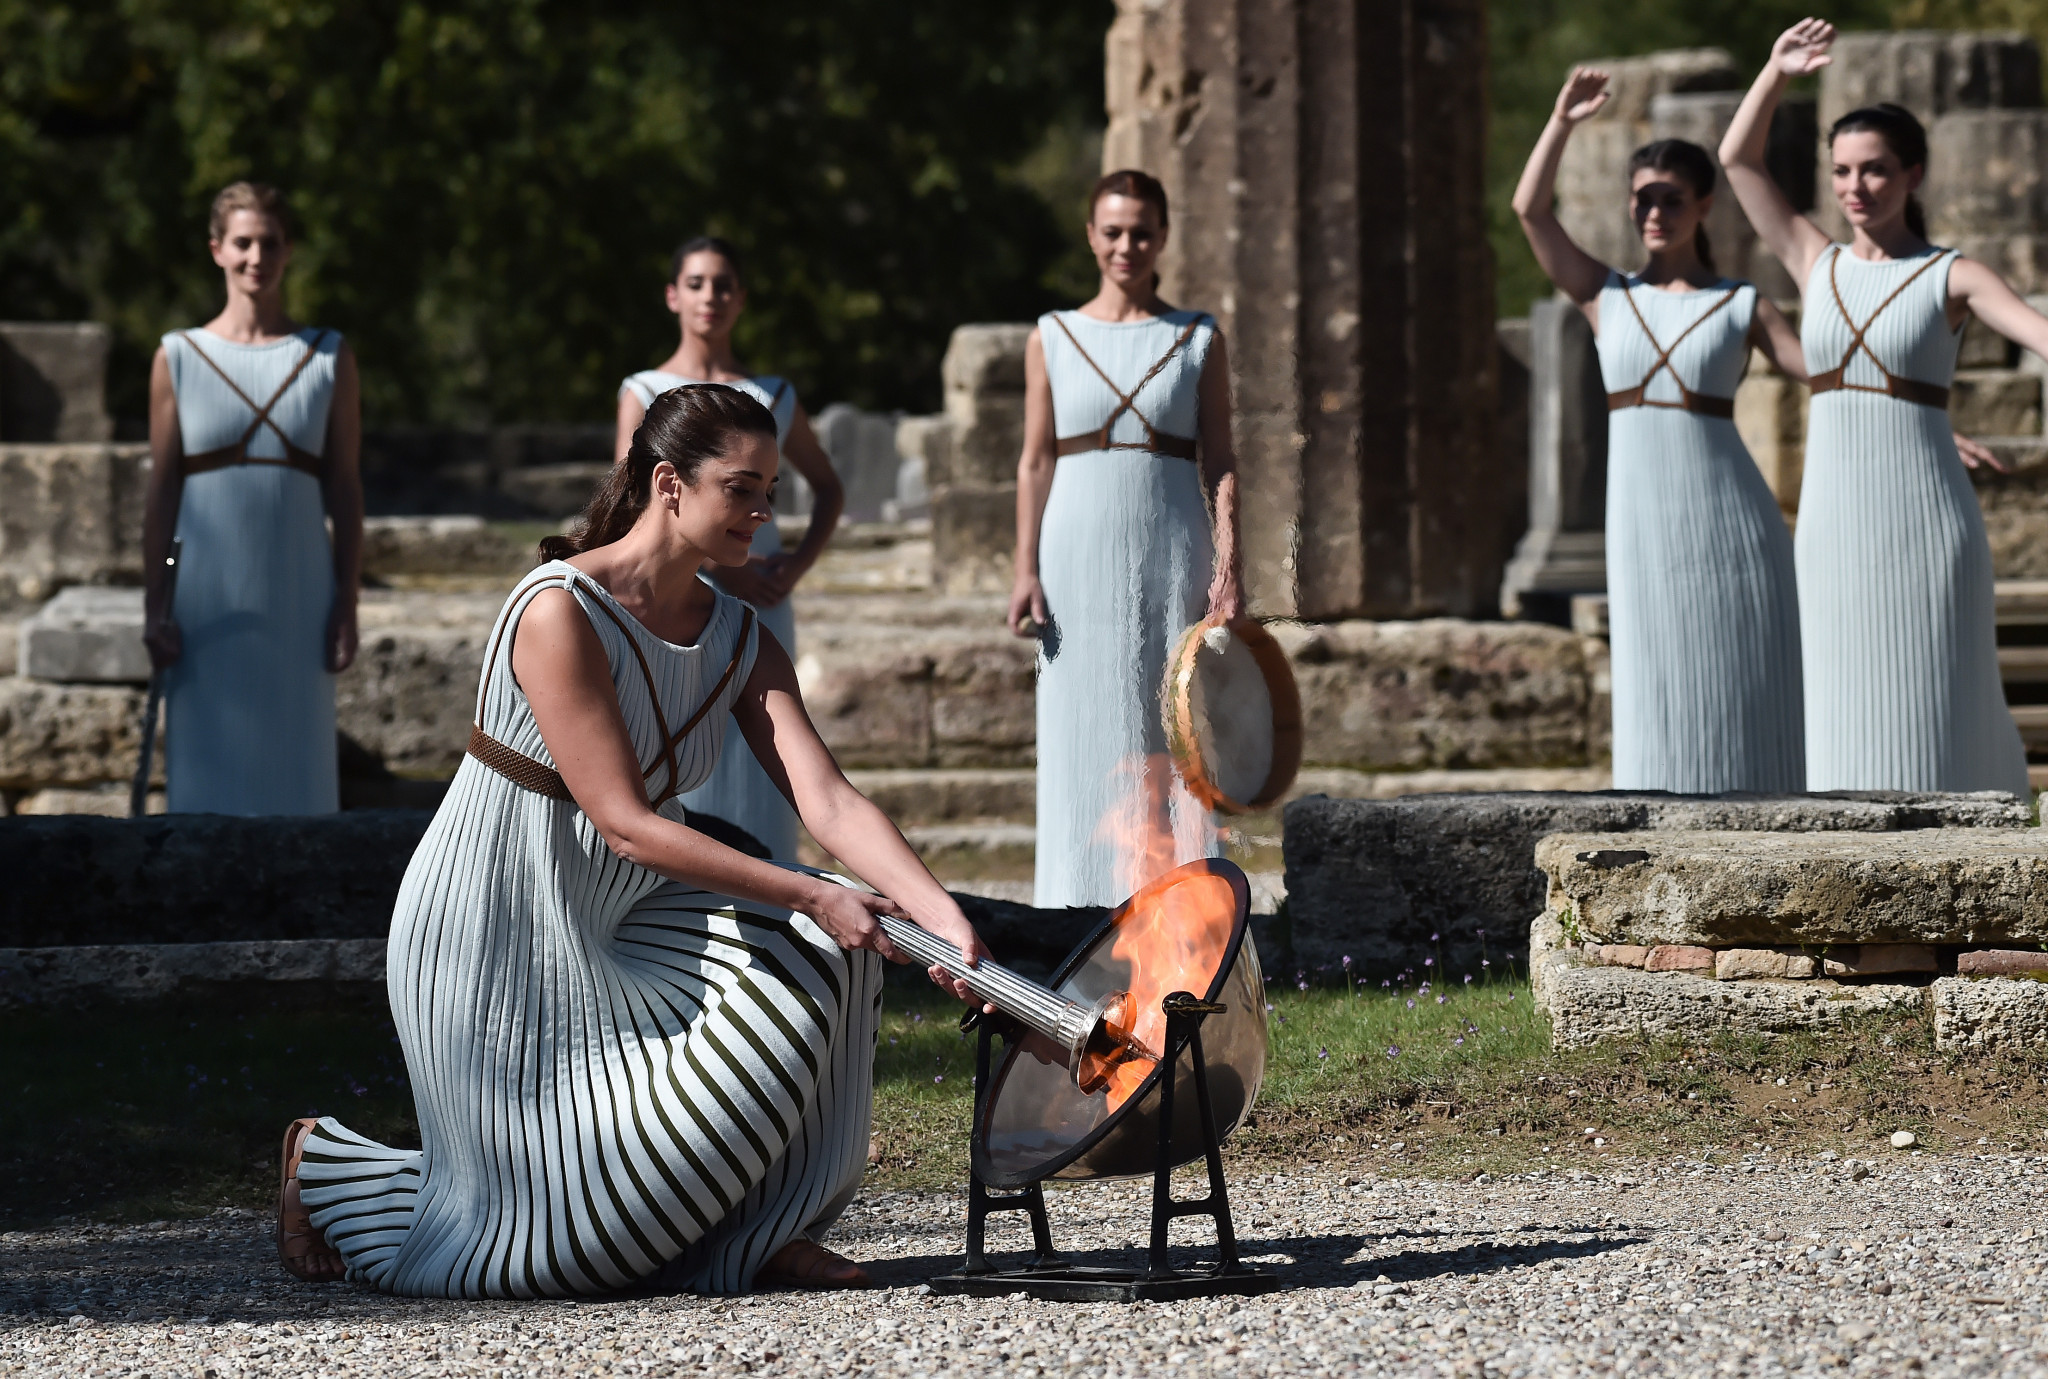 The Flame for Paris 2024 is set to be lit on April 16 2024 in Ancient Olympia ©Getty Images